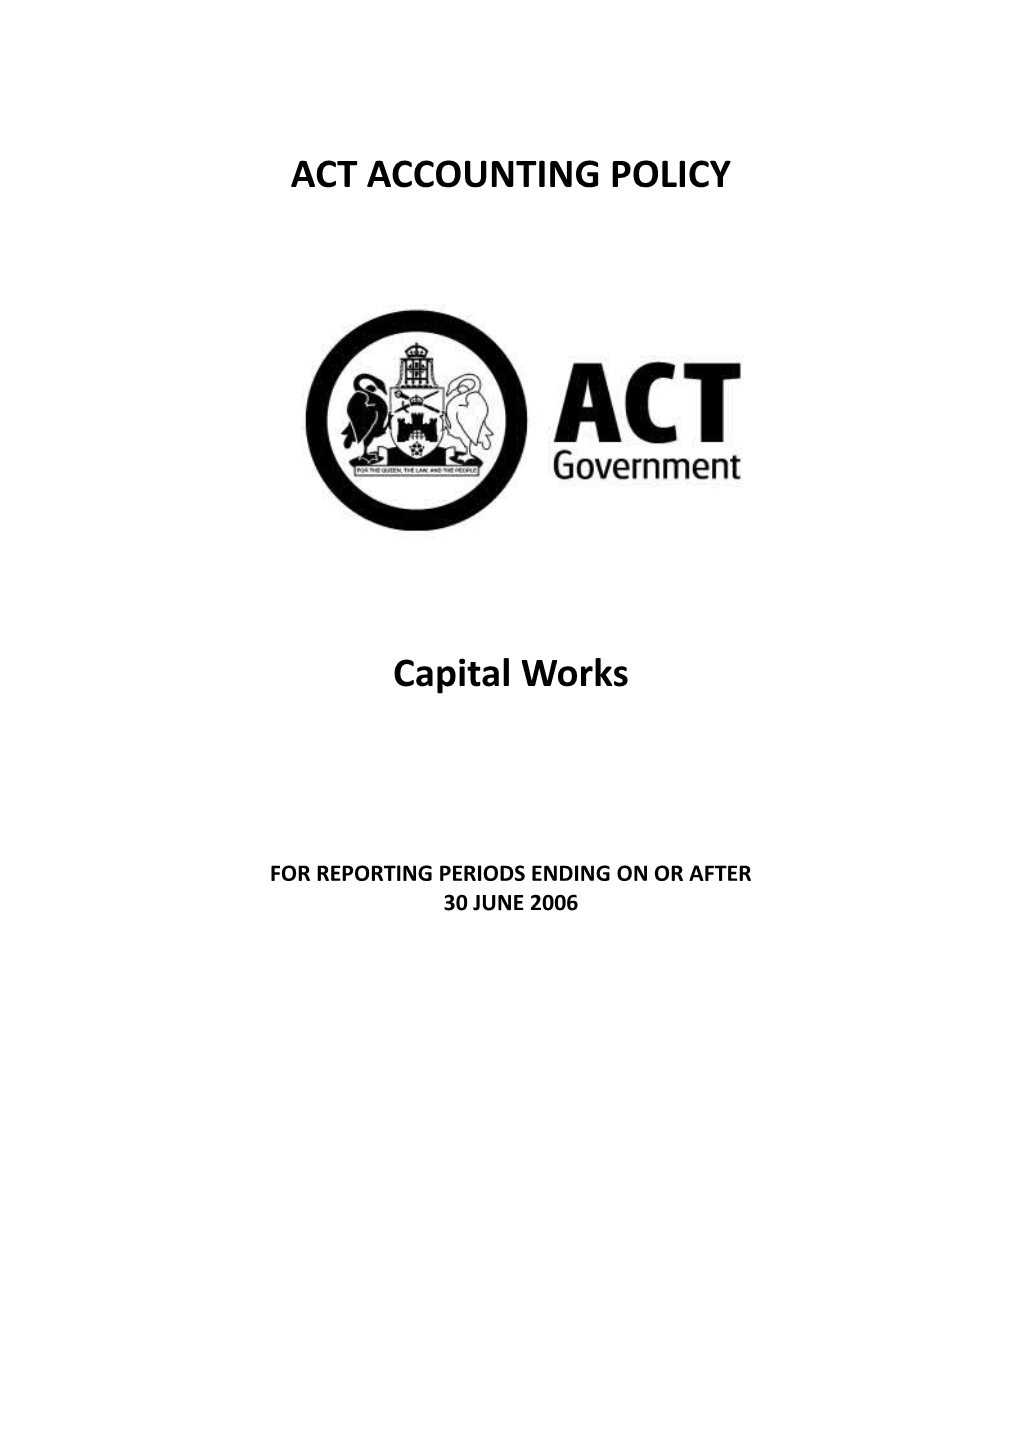 Capital Works Policy